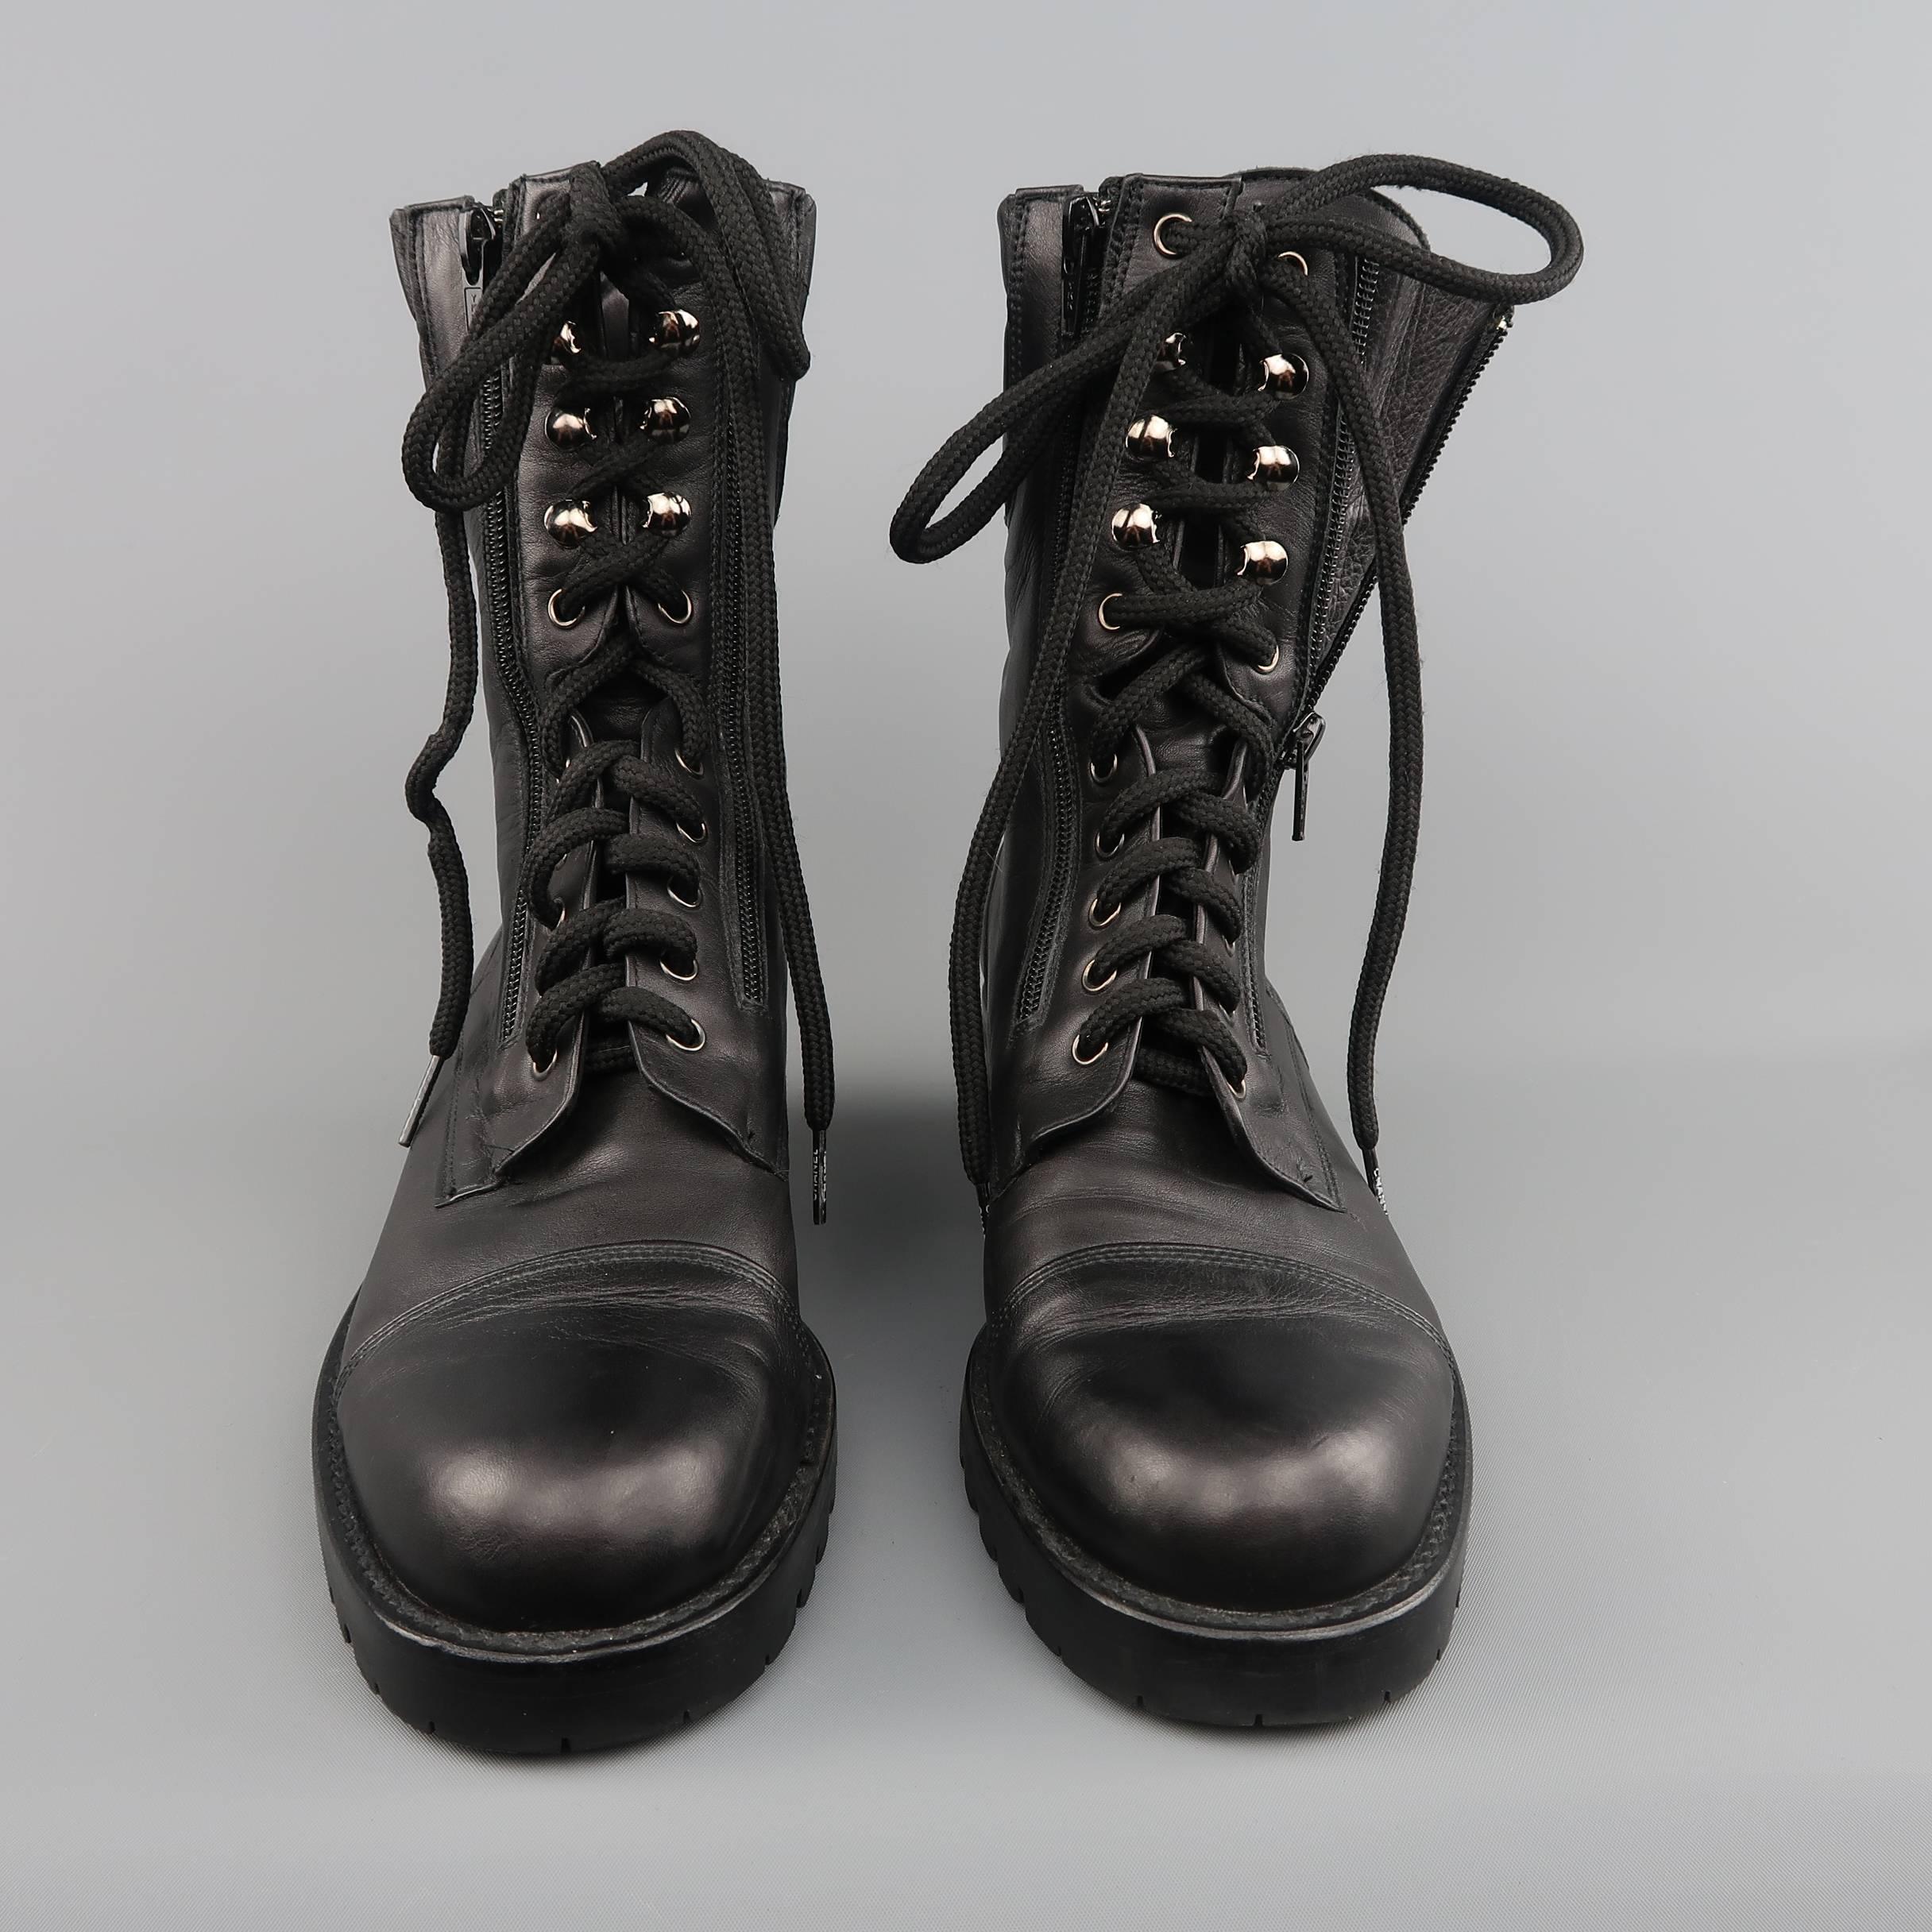 Women's CHANEL Size 10 Quilted Black Leather Zip Lace Up Military Combat Boots